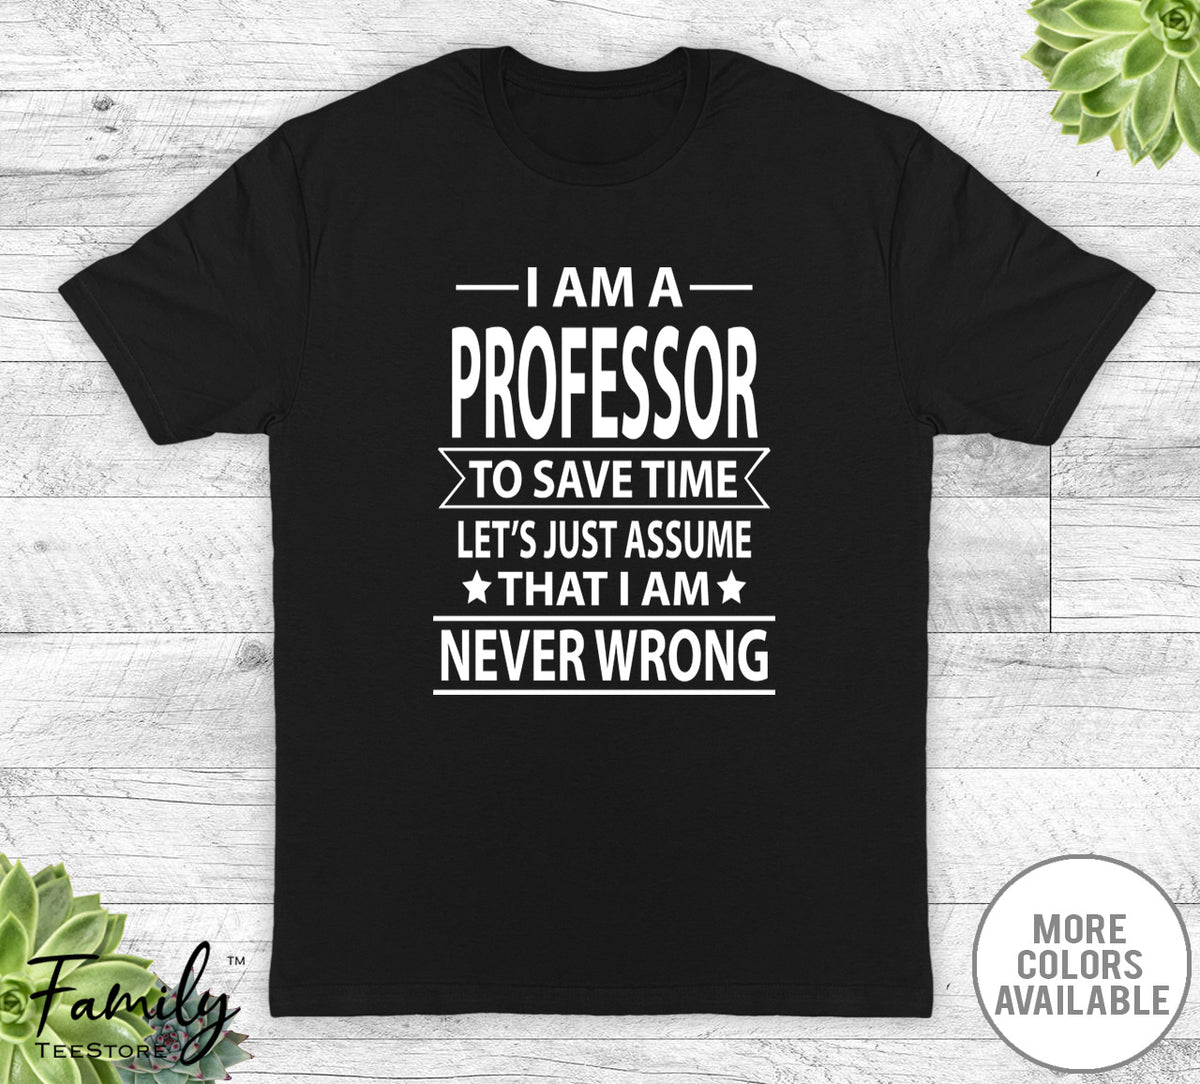 I Am A Professor To Save Time - Unisex T-shirt - Professor Shirt - Professor Gift